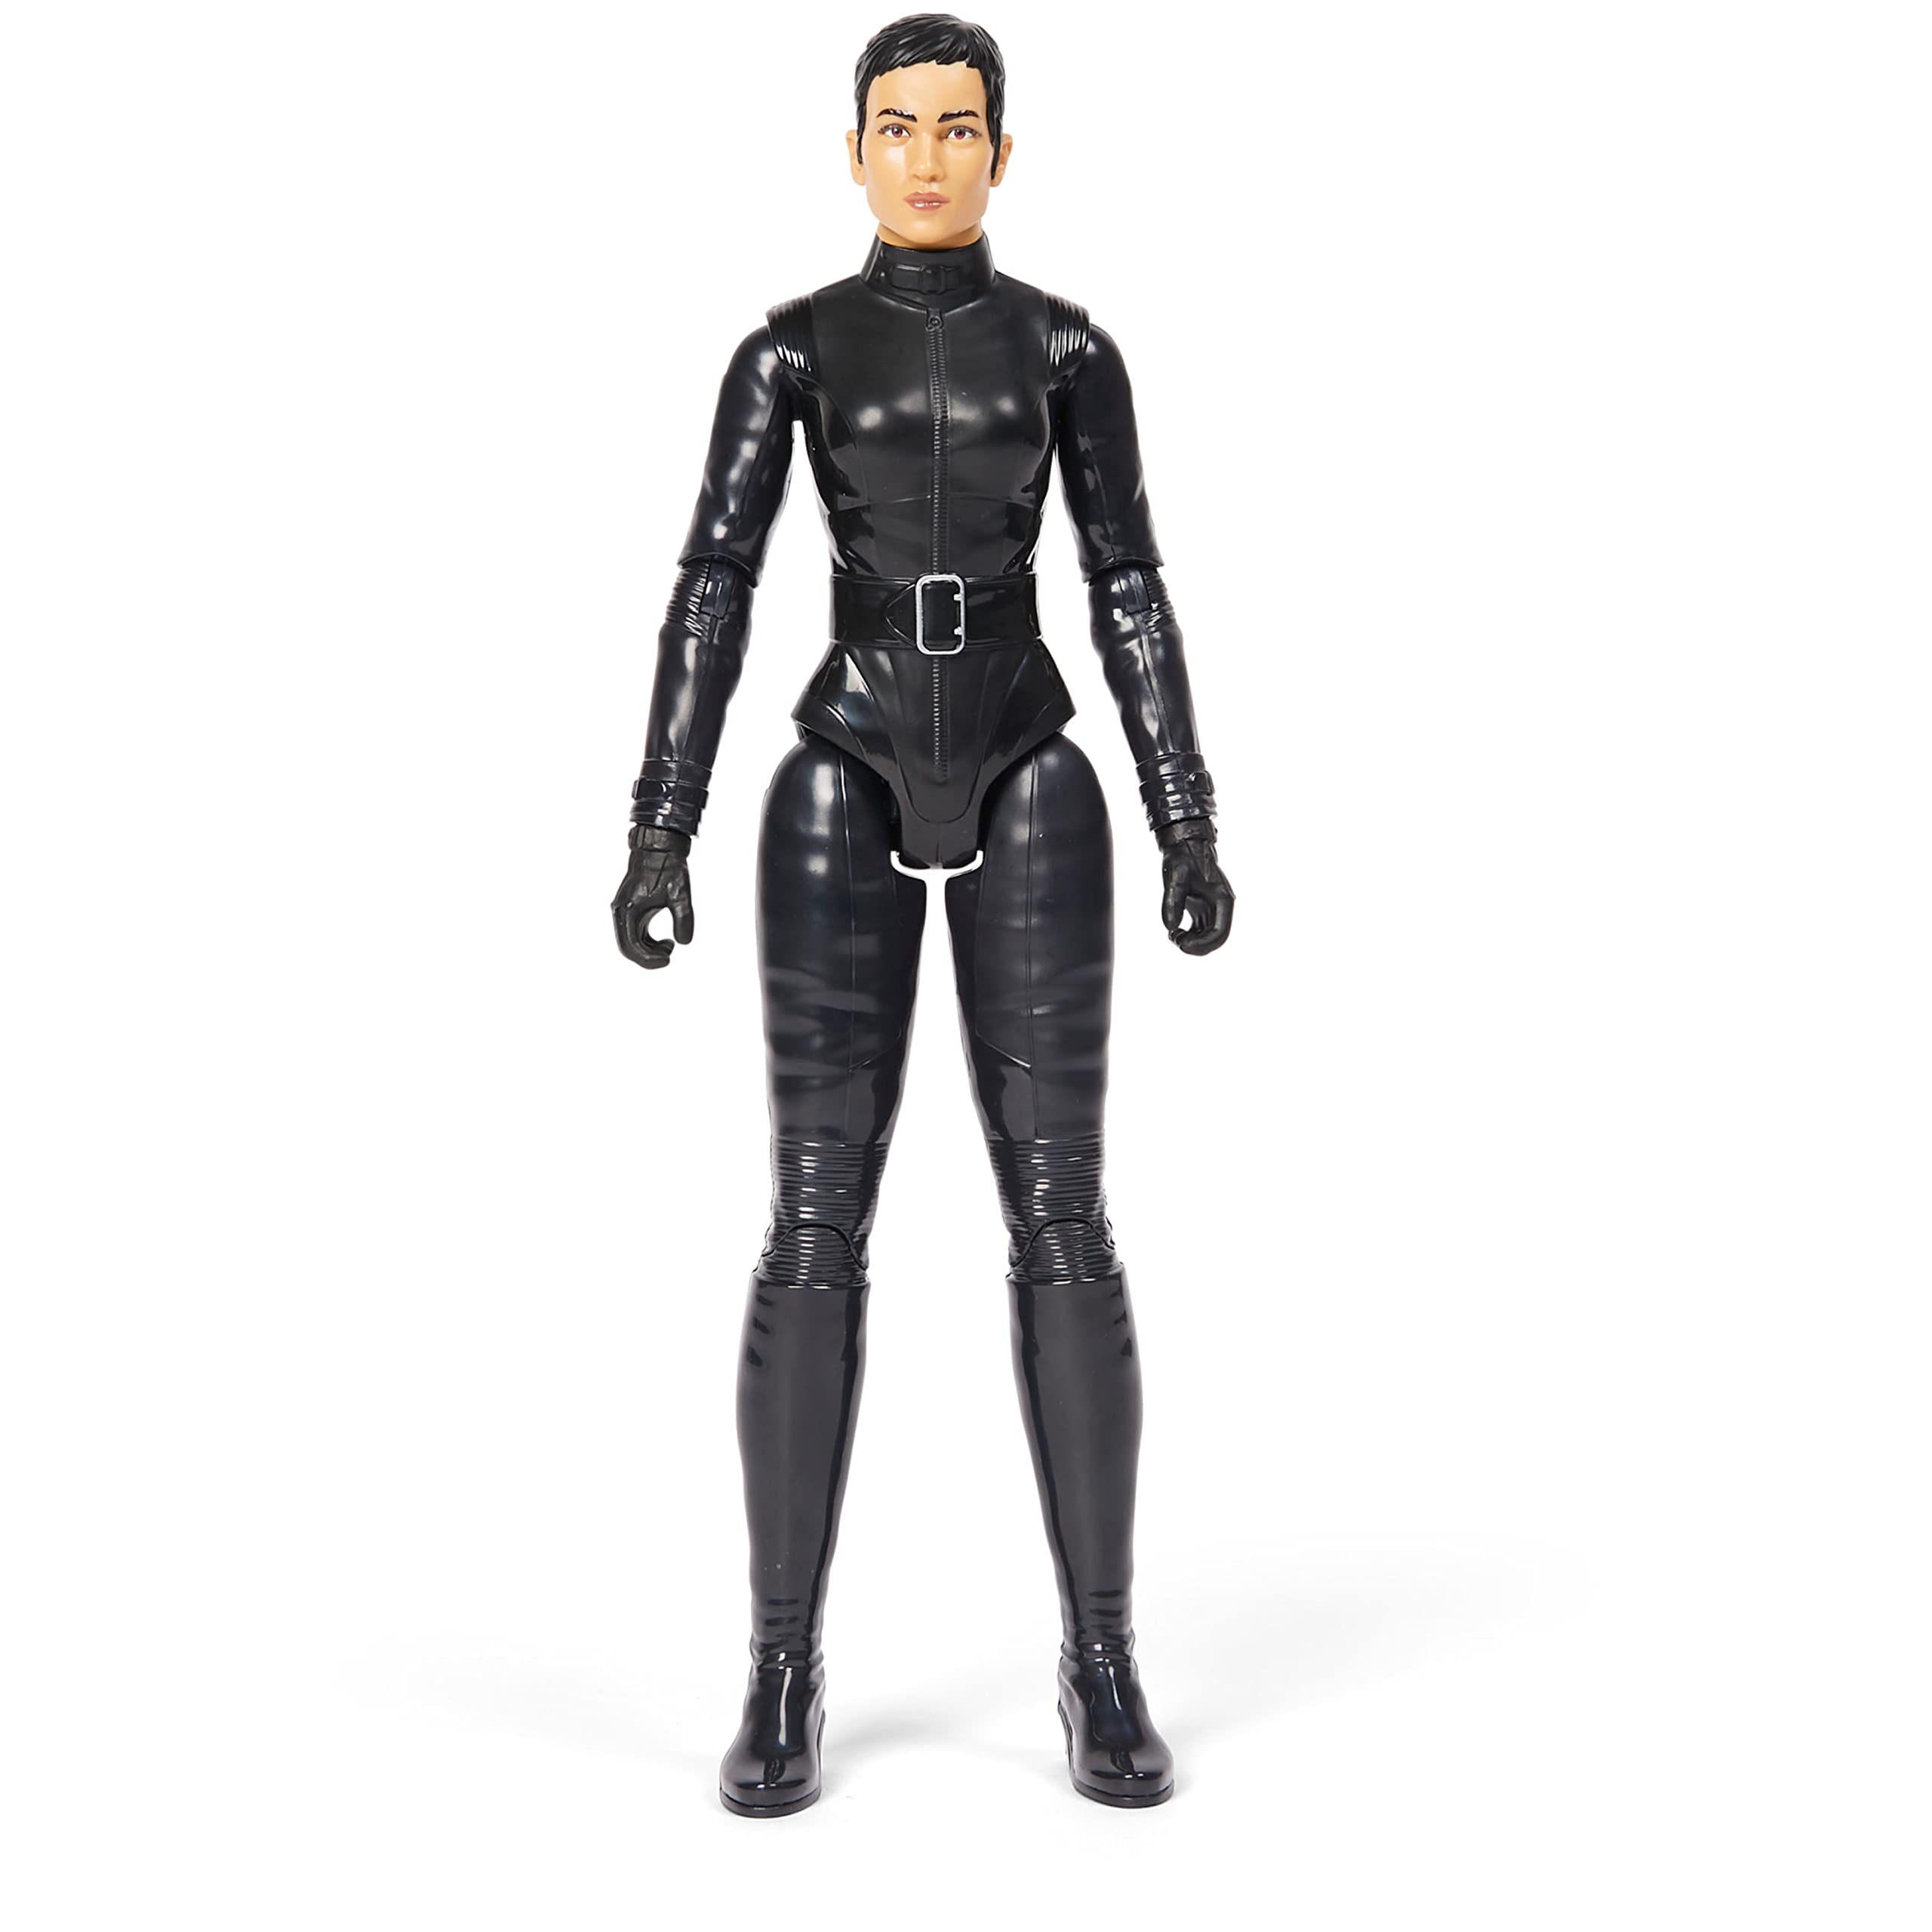 DC Comics, Batman 12-inch Selina Kyle Action Figure, The Batman Movie Collectible Kids Toys for Boys and Girls Ages 3 and Up